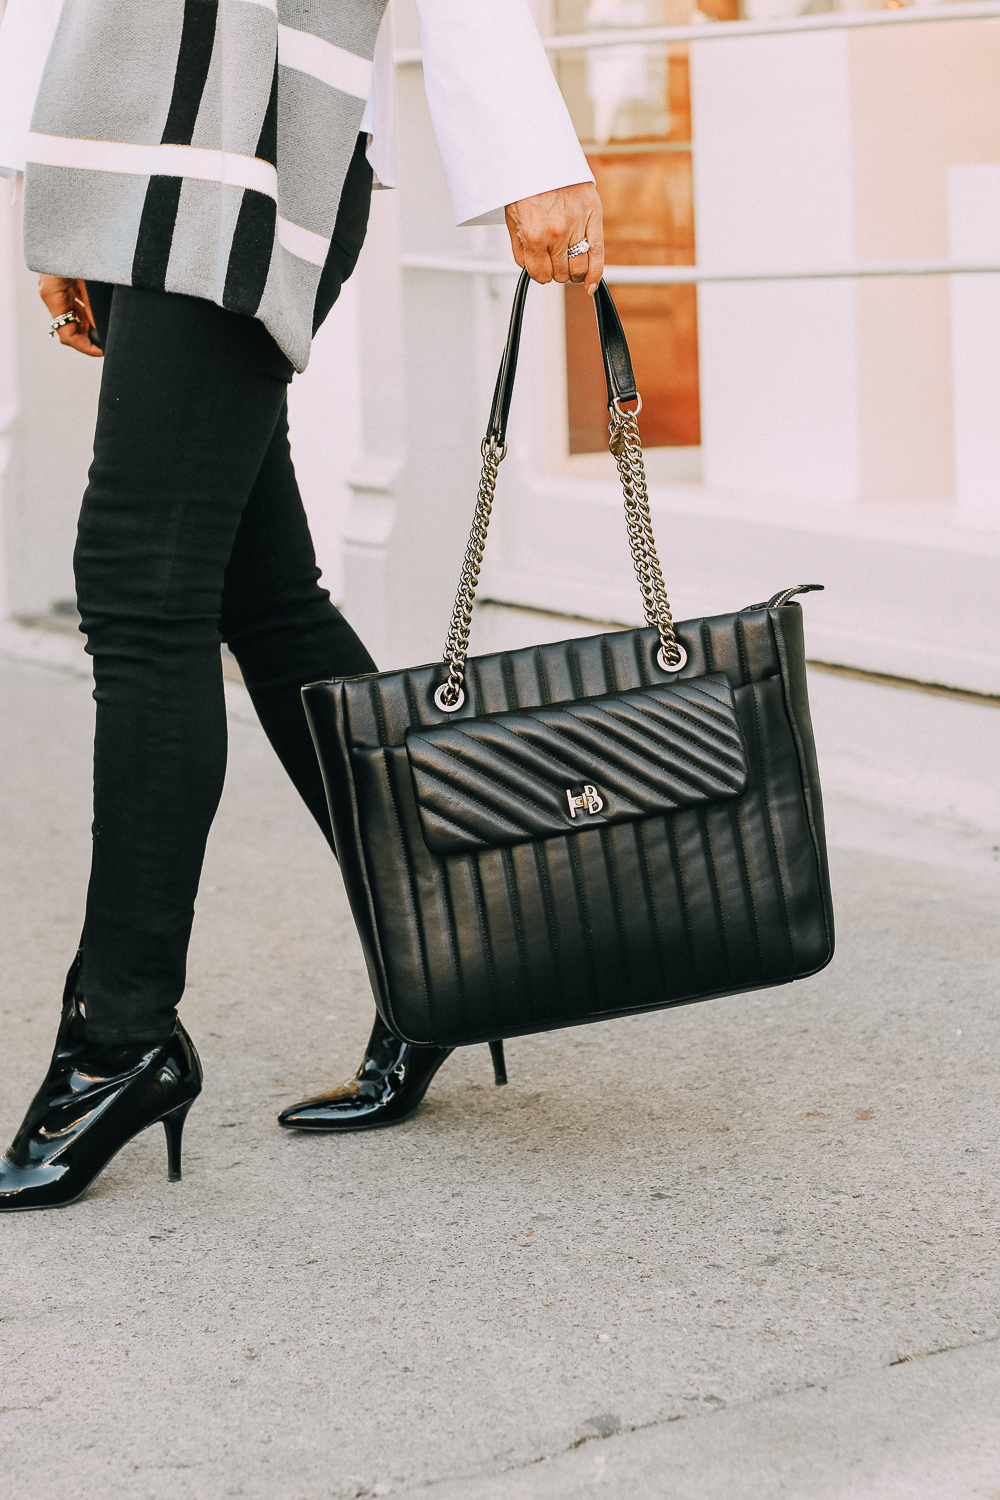 Work Bag for Women 2018 | Featuring 712 Tote by Henri Bendel